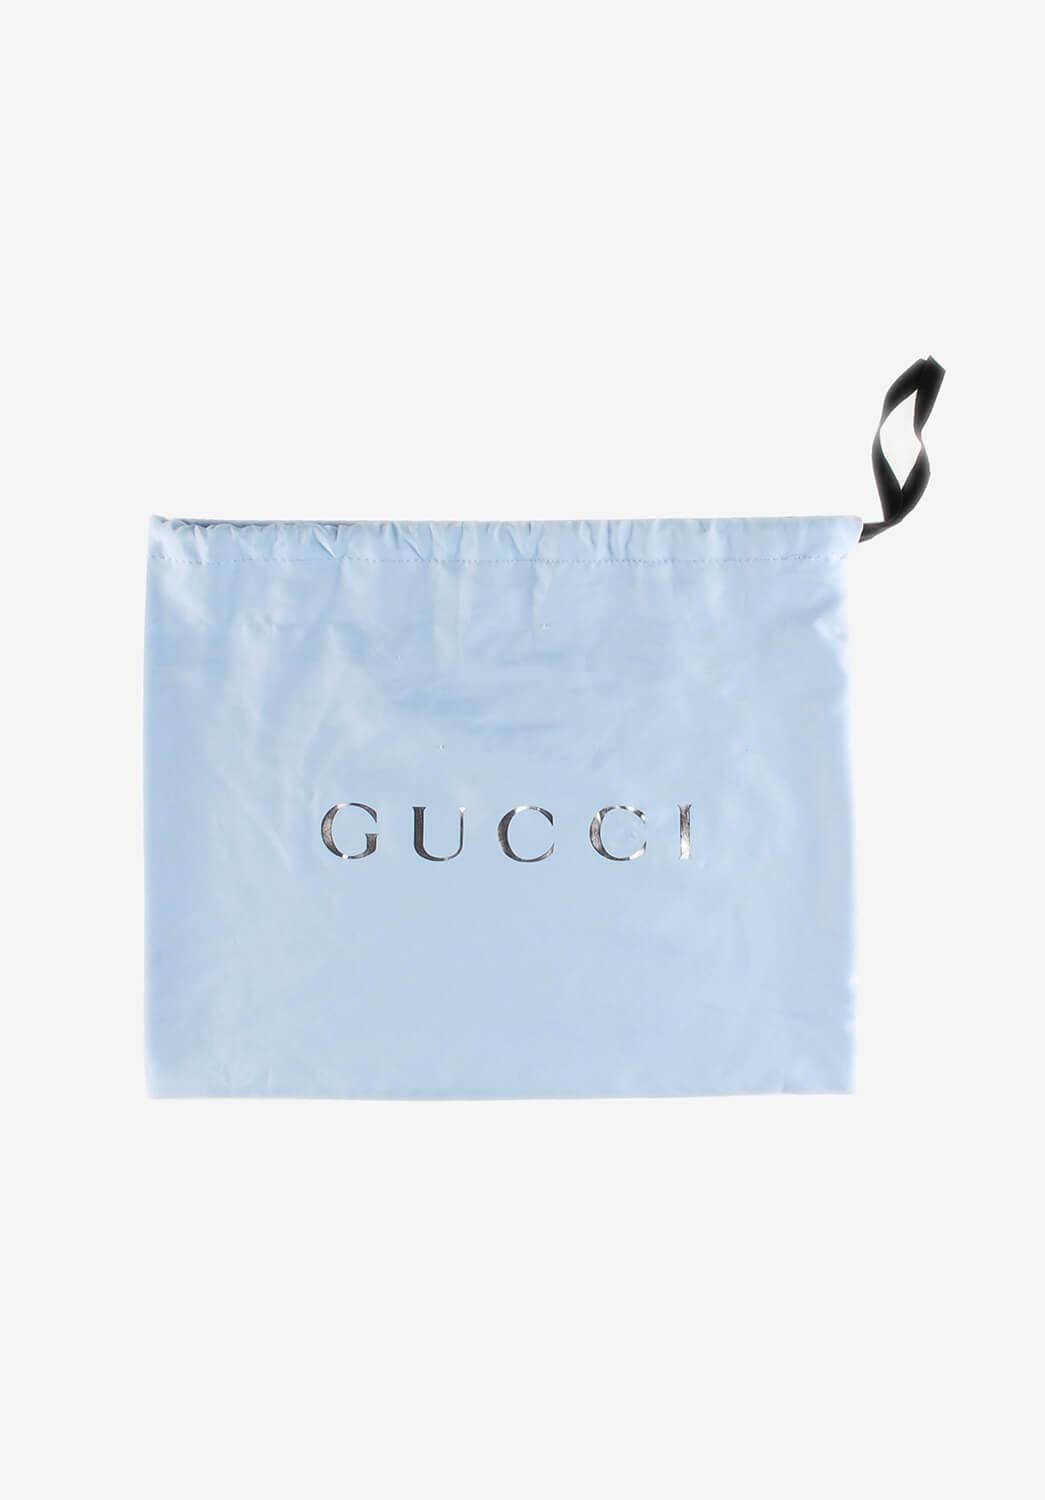  New Gucci GG Supreme Apple Print Women Waist Bag Leather Details S044 For Sale 2